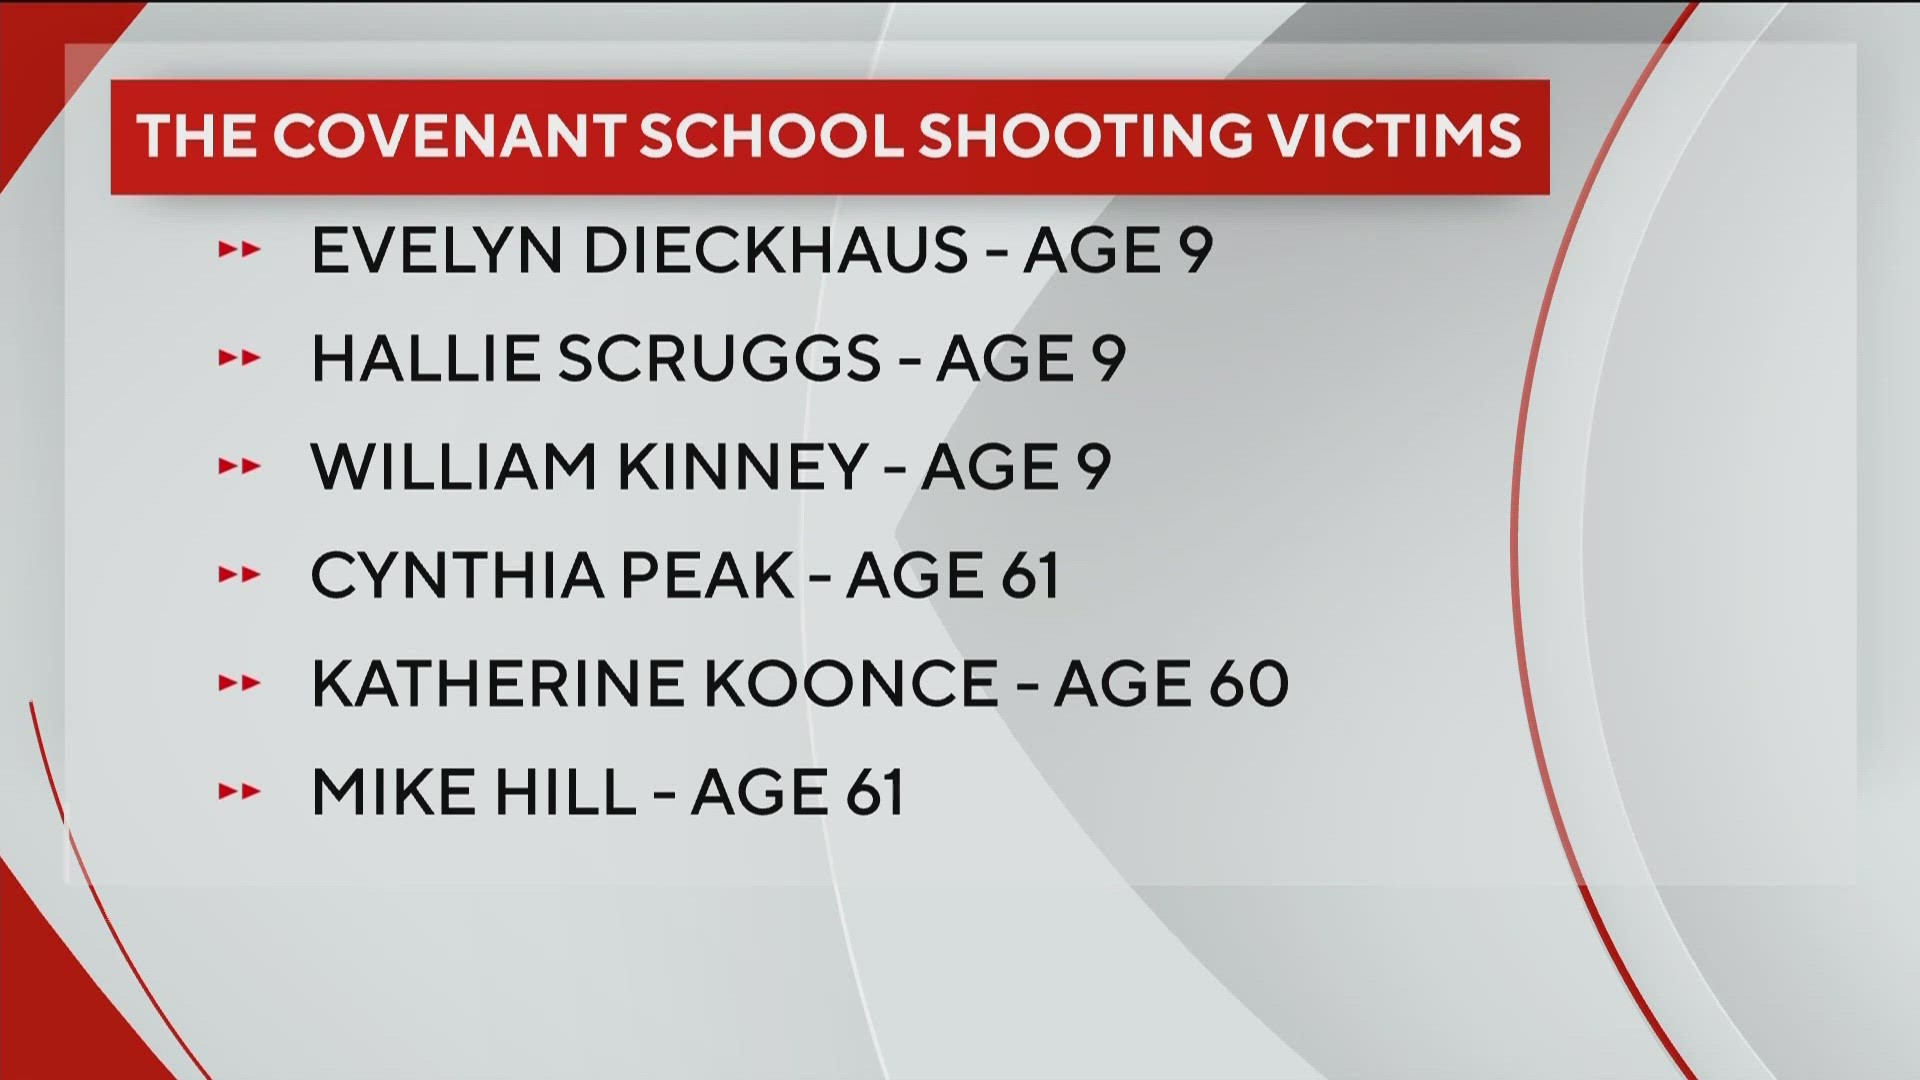 Police have identified the 3 children and 3 adults killed in Monday's shooting at a Christian elementary school in Nashville.